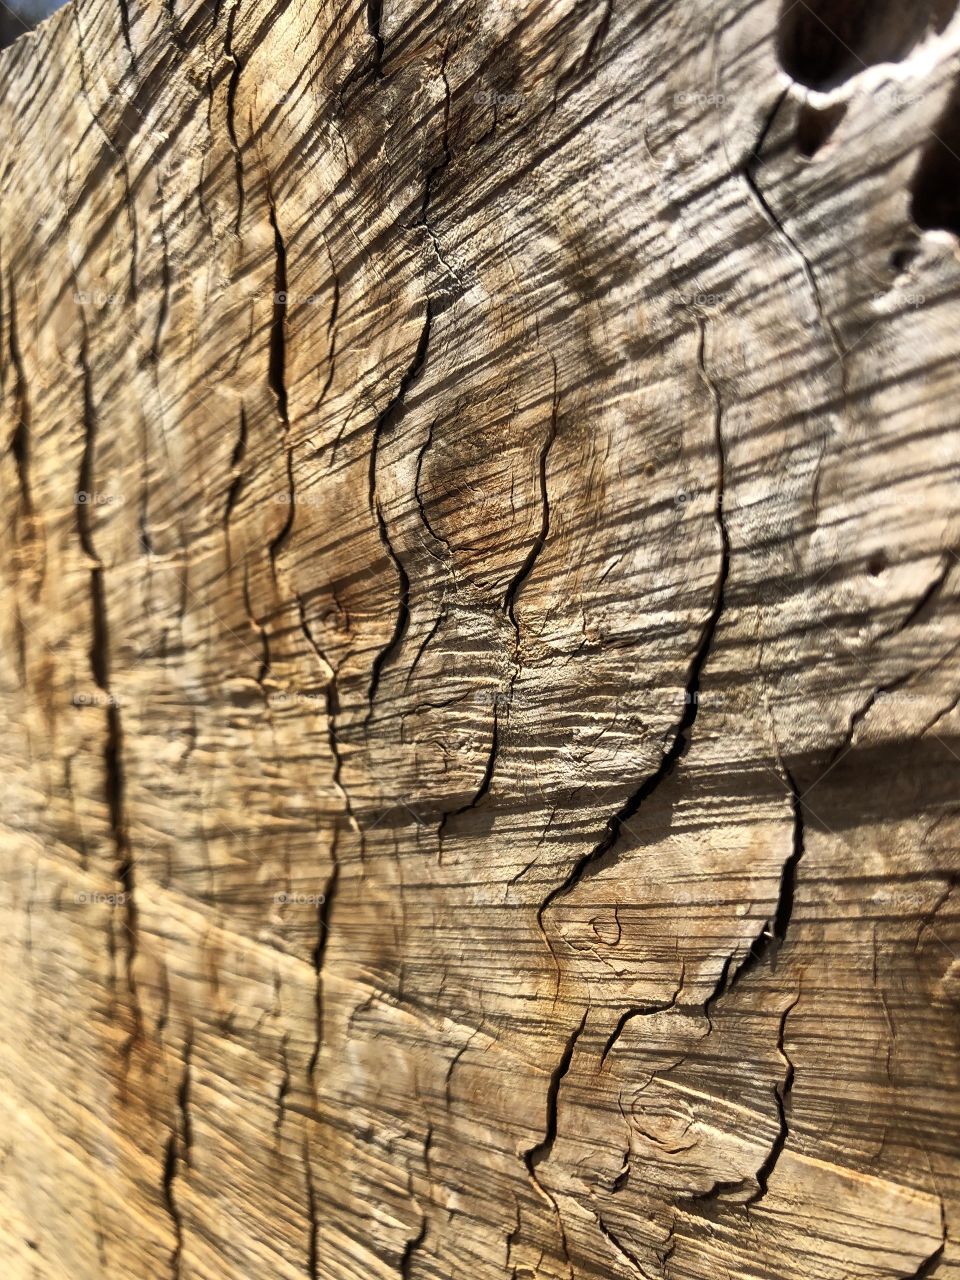 Texture. Dissection of a tree.